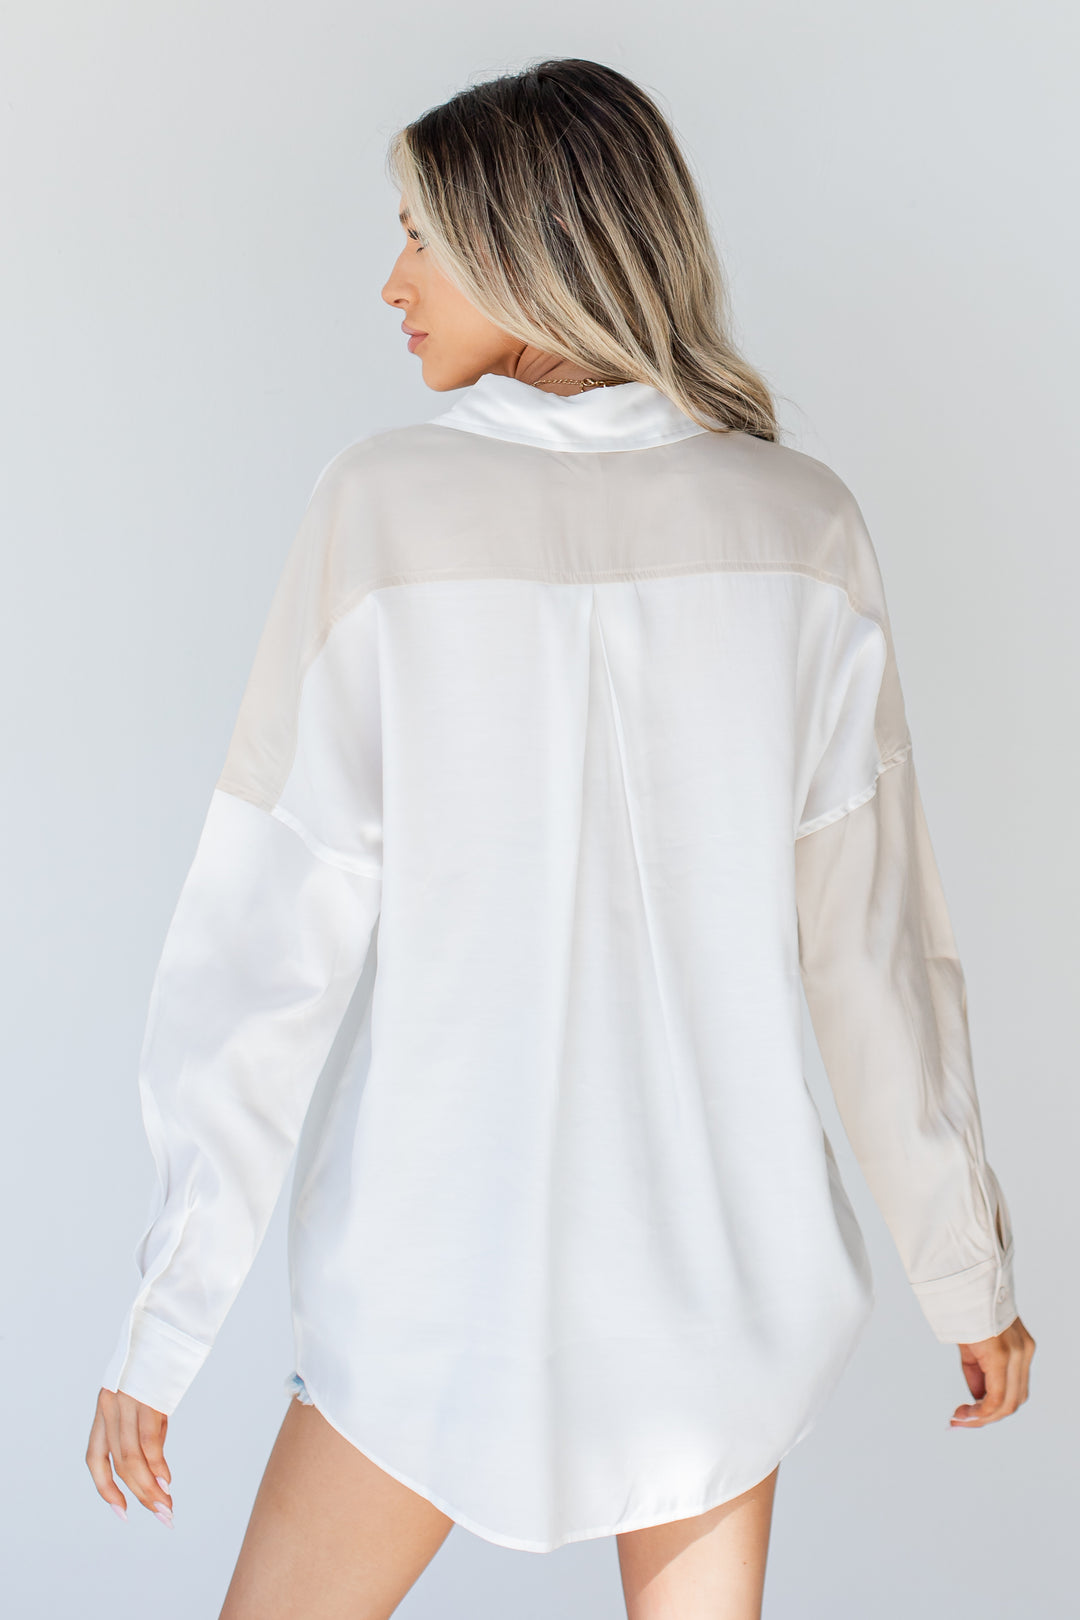 Two Tone Button-Up Blouse in tan back view